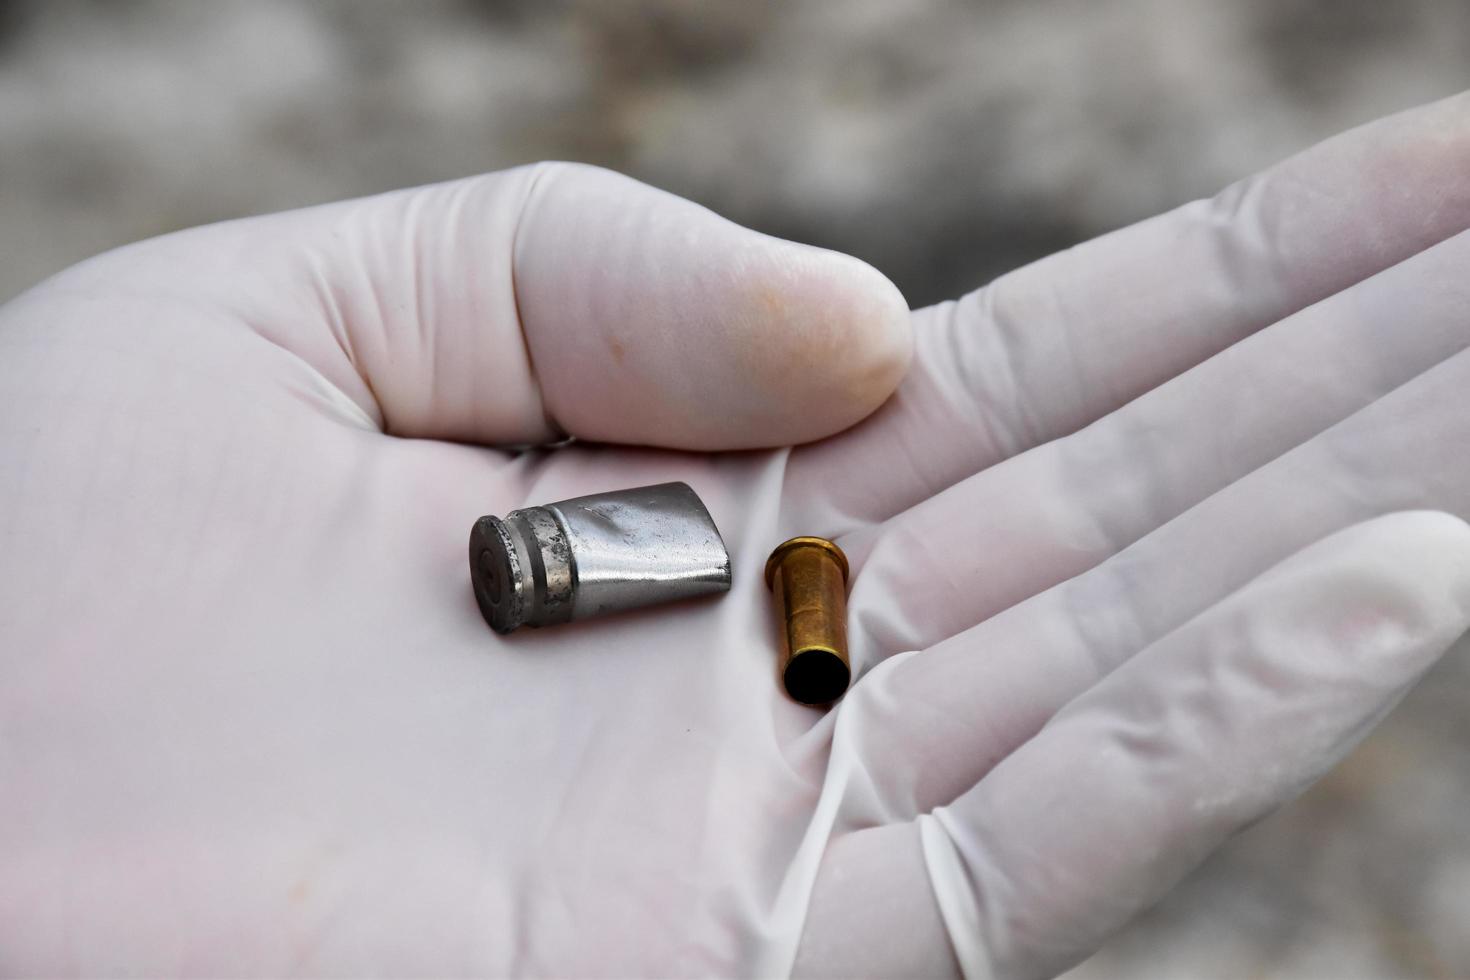 Forensic officers holds physical evidence which is the bullet shell up to eye level to determine the size and type of ammunition at the murder. photo